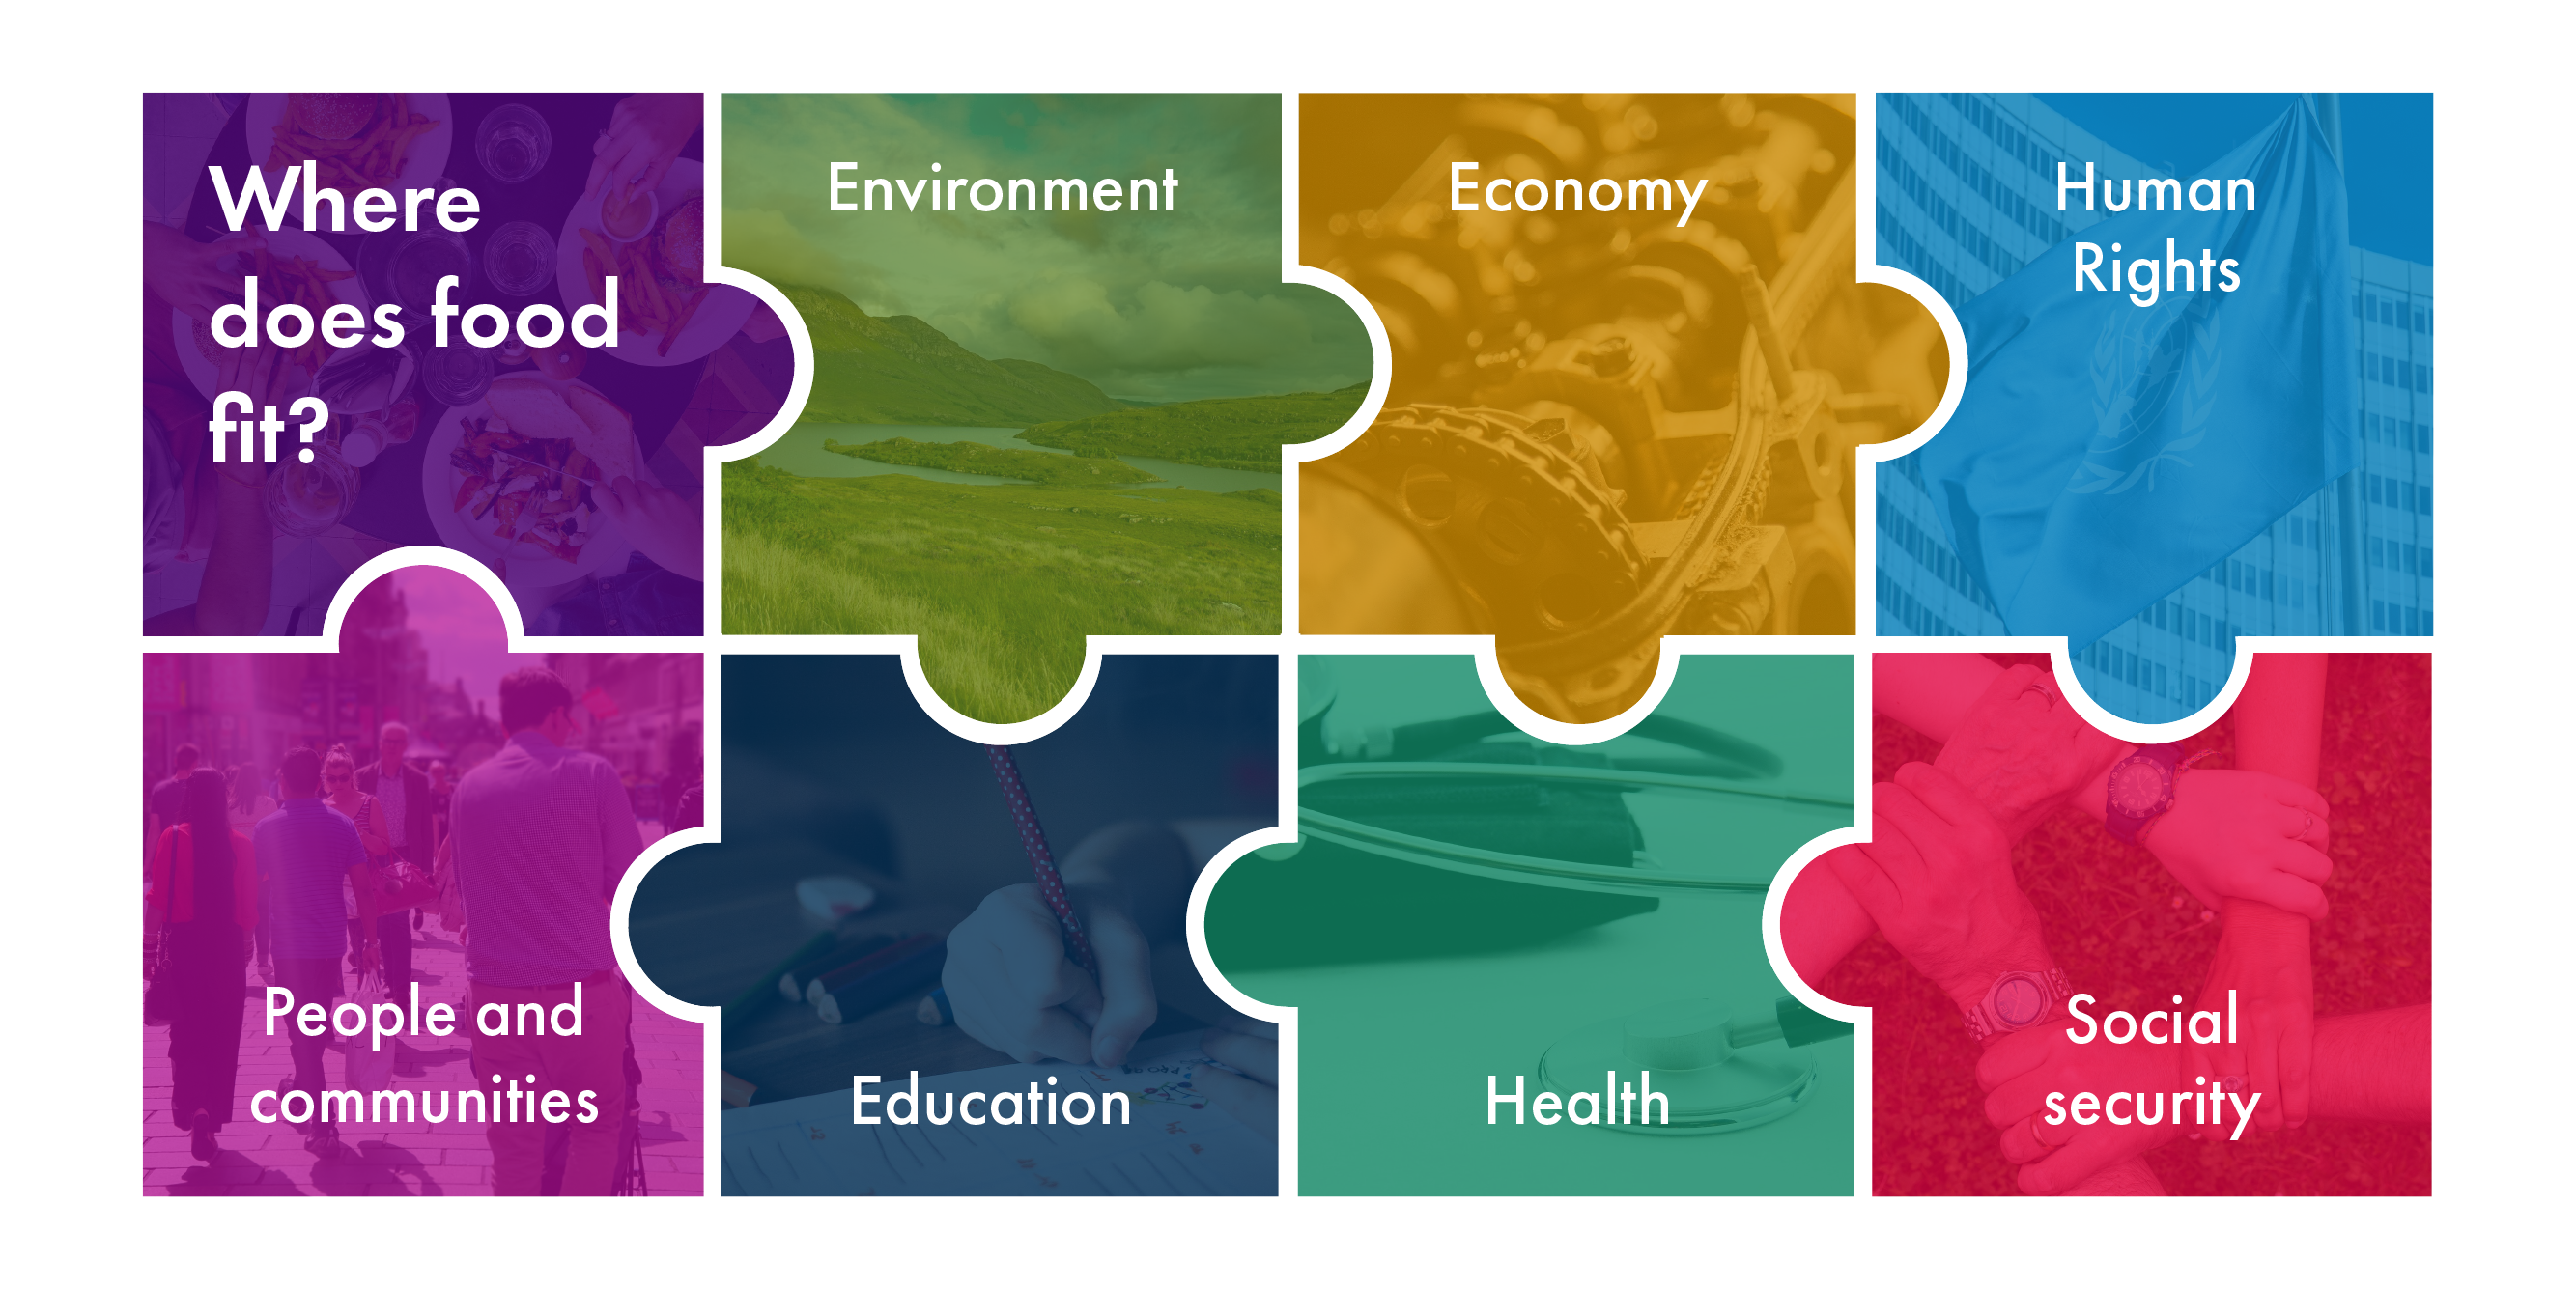 Image showing a jigsaw of different policy areas. The jigsaw asks "where does food fit" and highlights that environment, economy, human rights, people and communities, education, health and social security all relate to food.